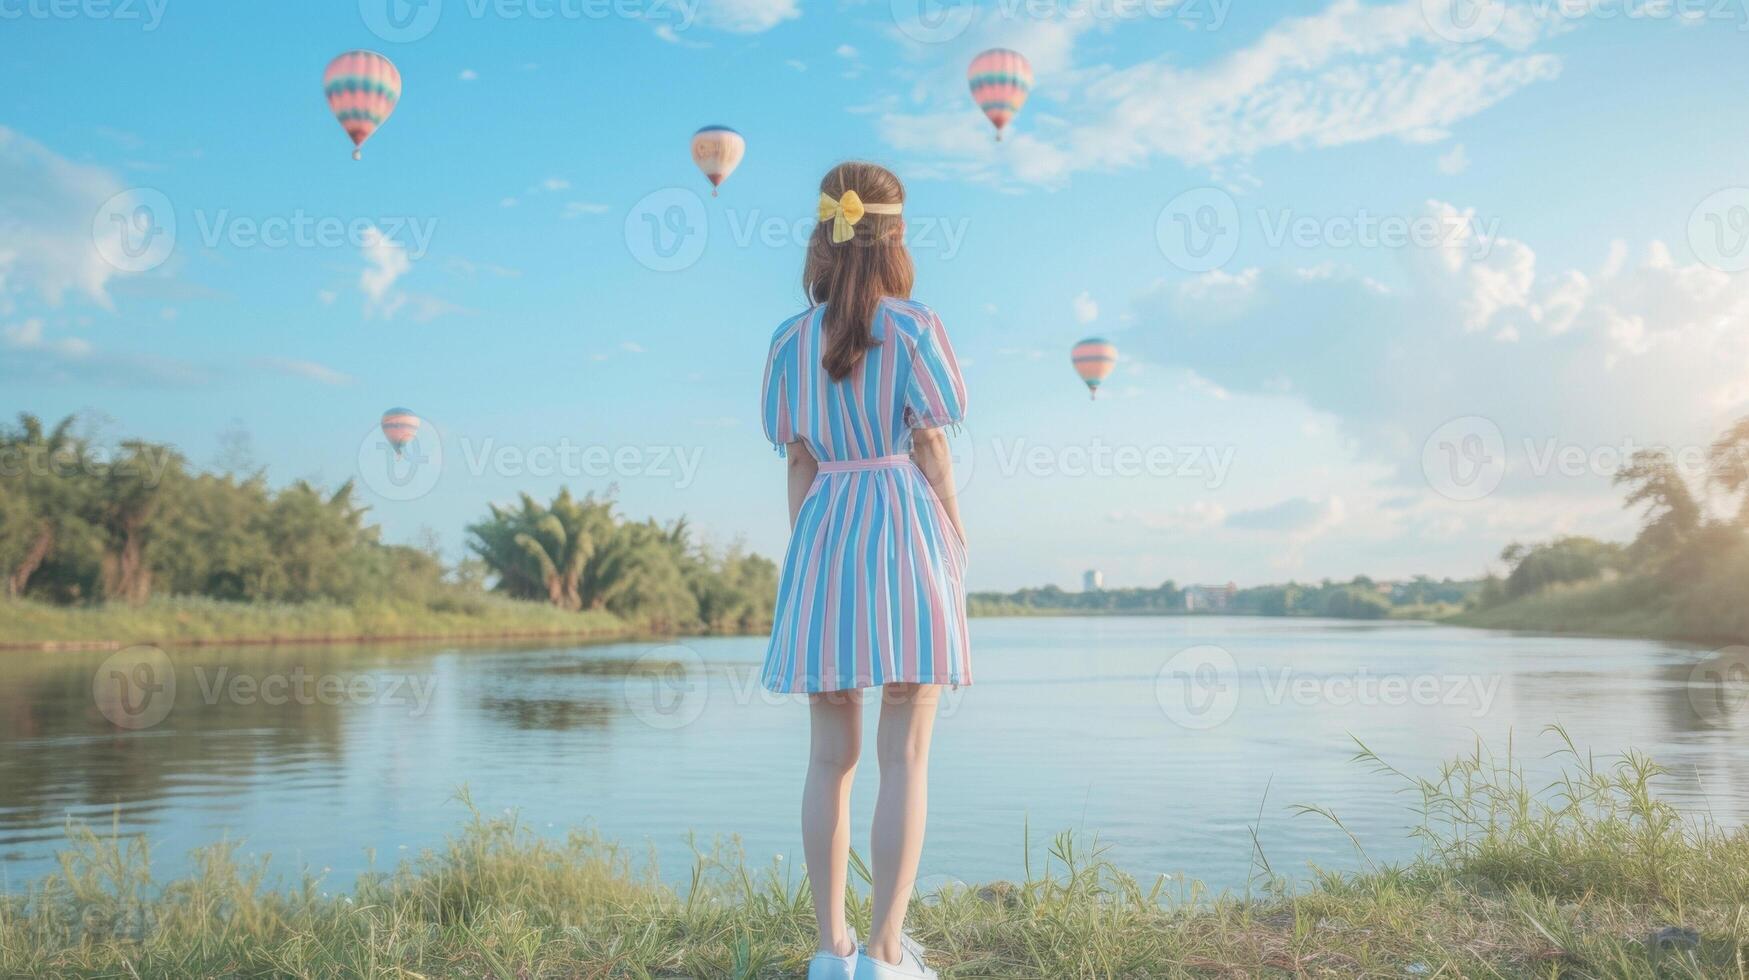 A pastel blue and pink striped buttondown shirt dress paired with white sneakers and a pastel yellow headband. The background is a peaceful riverbank with pastel colored ho photo